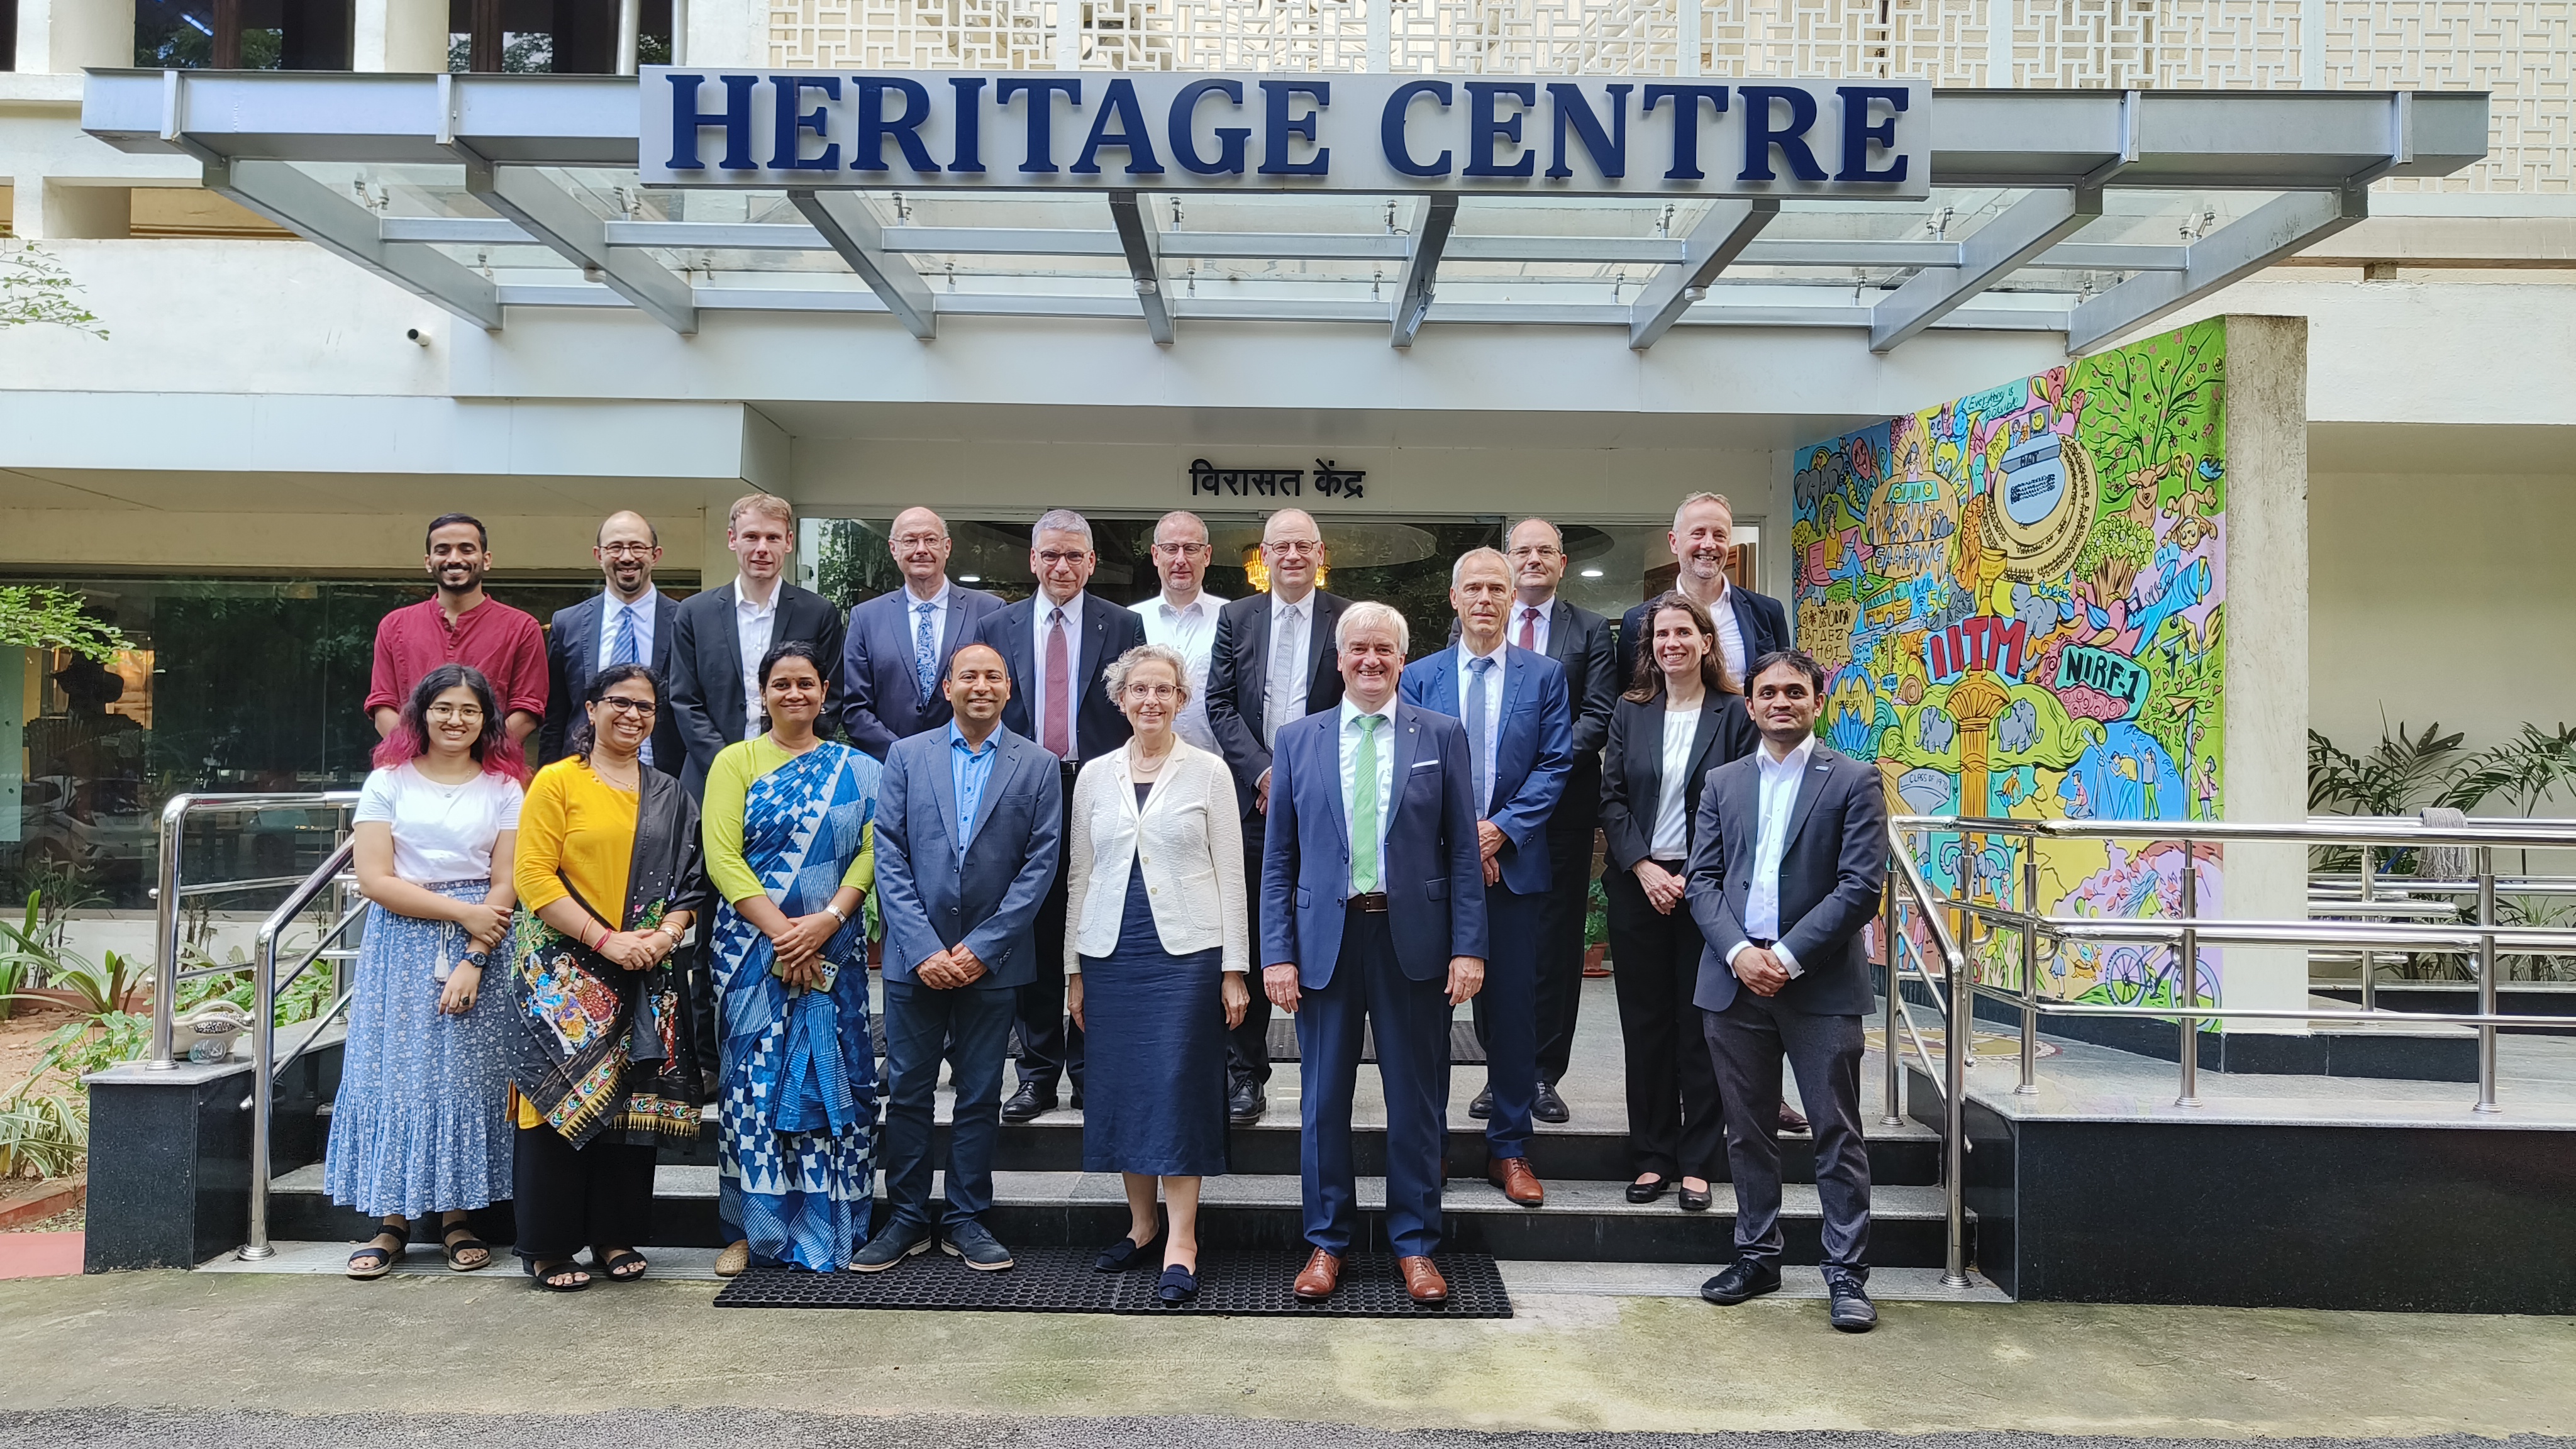 The Heritage Centre team with the esteemed guests